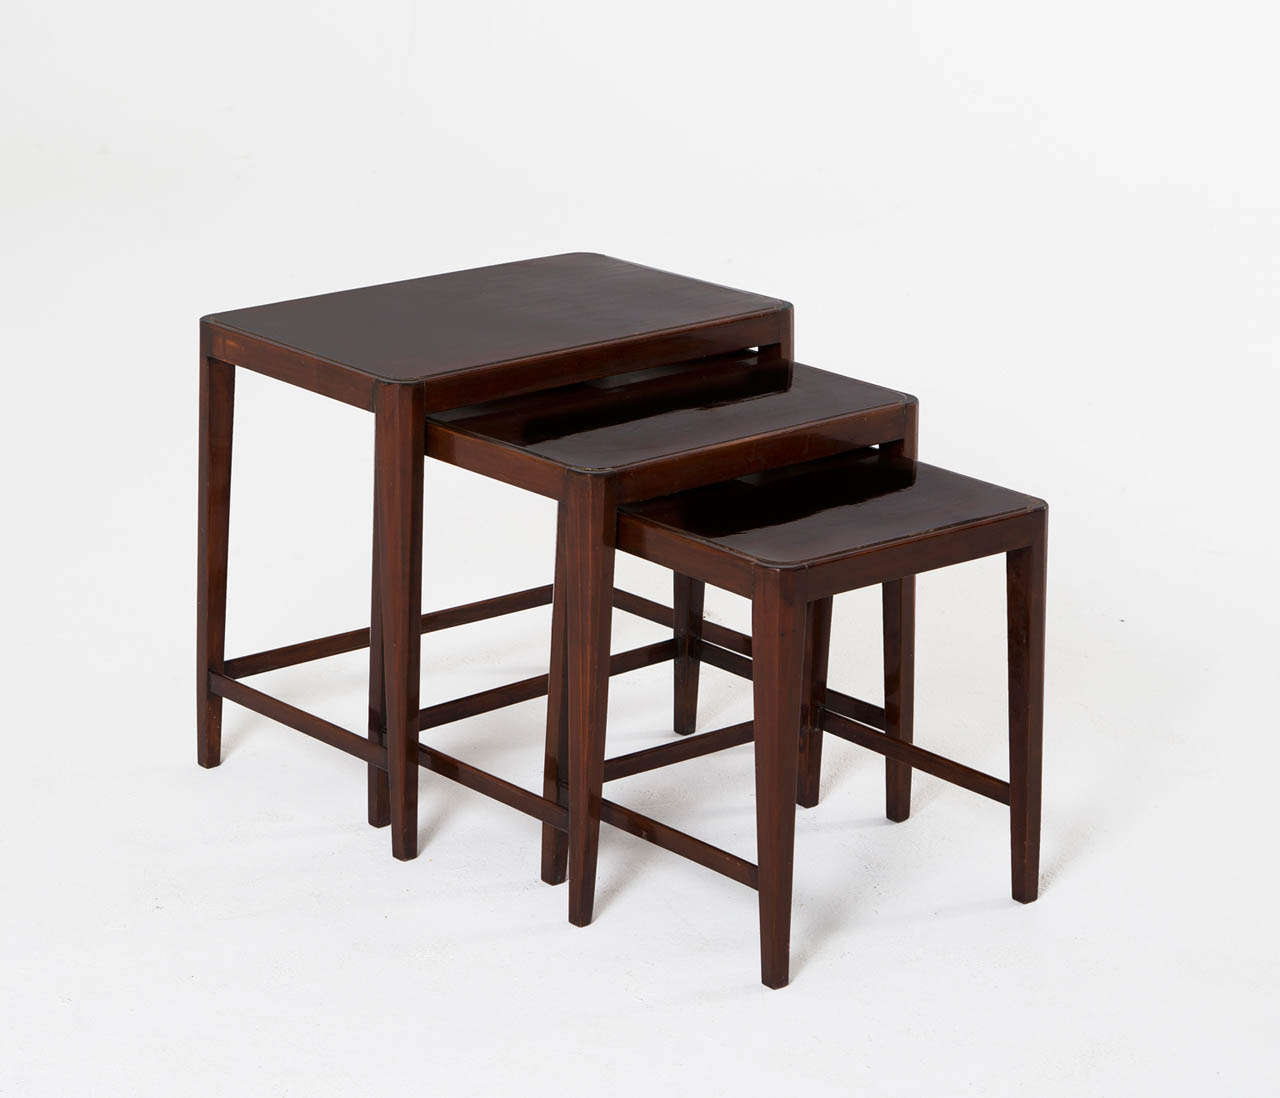 Very sculptural nest of tables in dark stained oak with a high gloss finish.

Free shipping for all European destinations and discounted shipping to all intercontinental destinations starting at $95, depending on the item of your selection.  